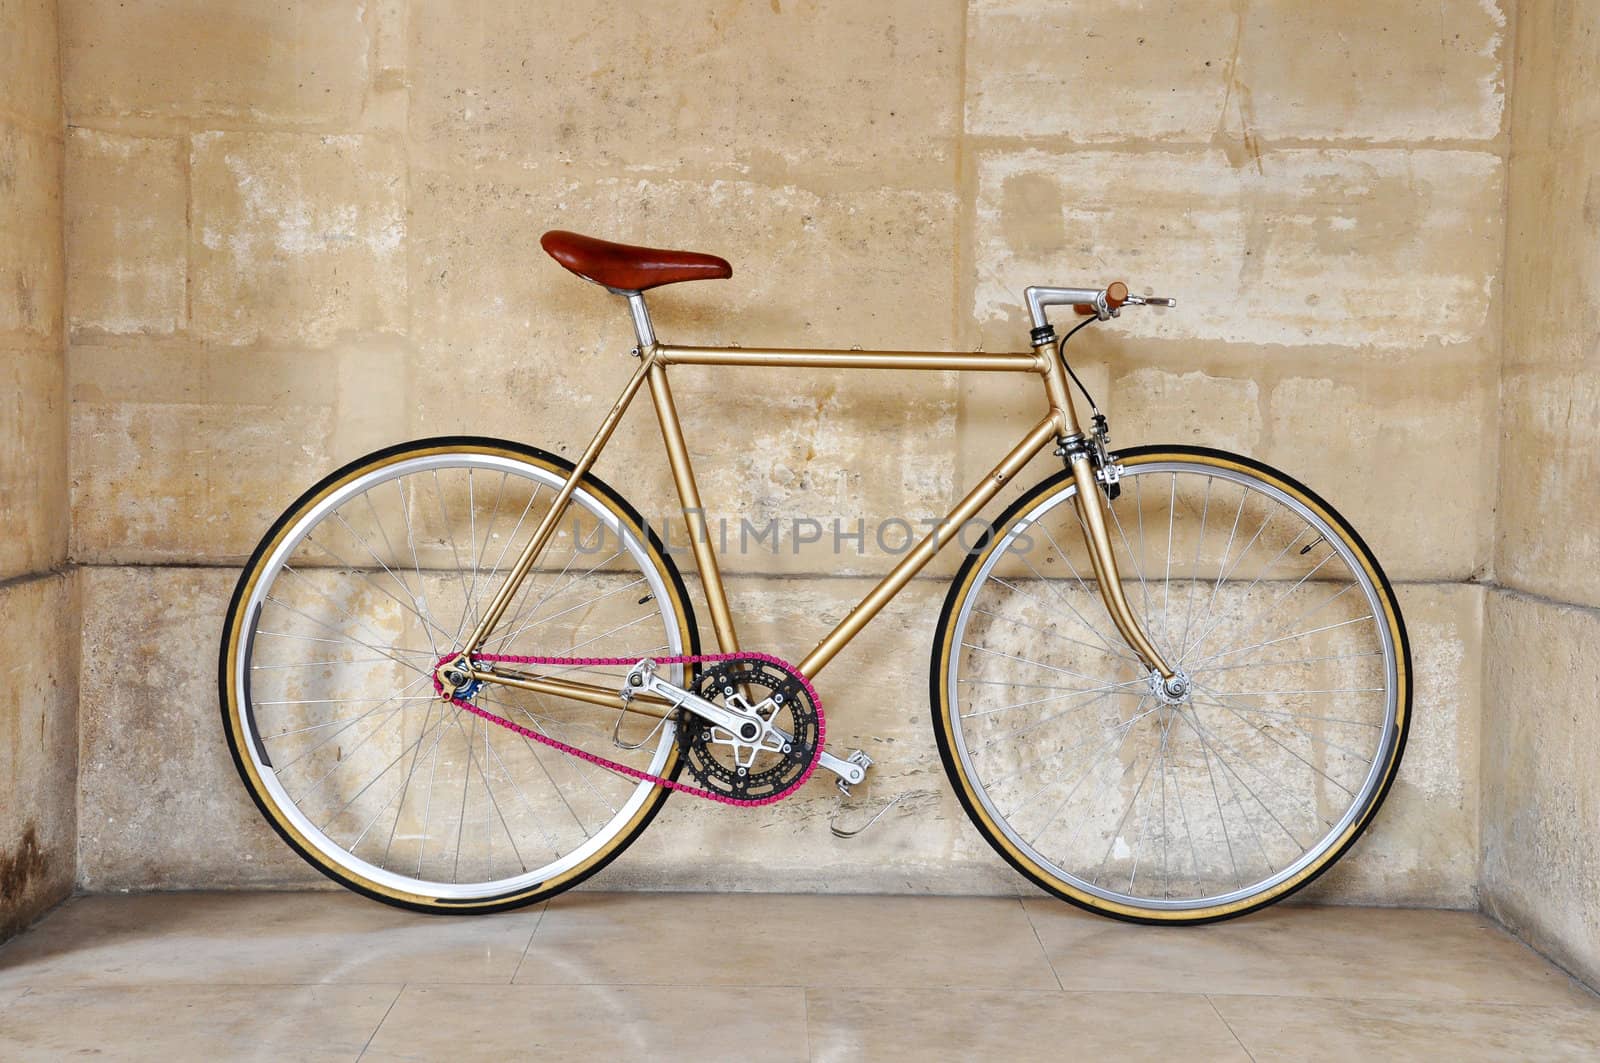 Vintage fixed gear bicycle with a pink chain